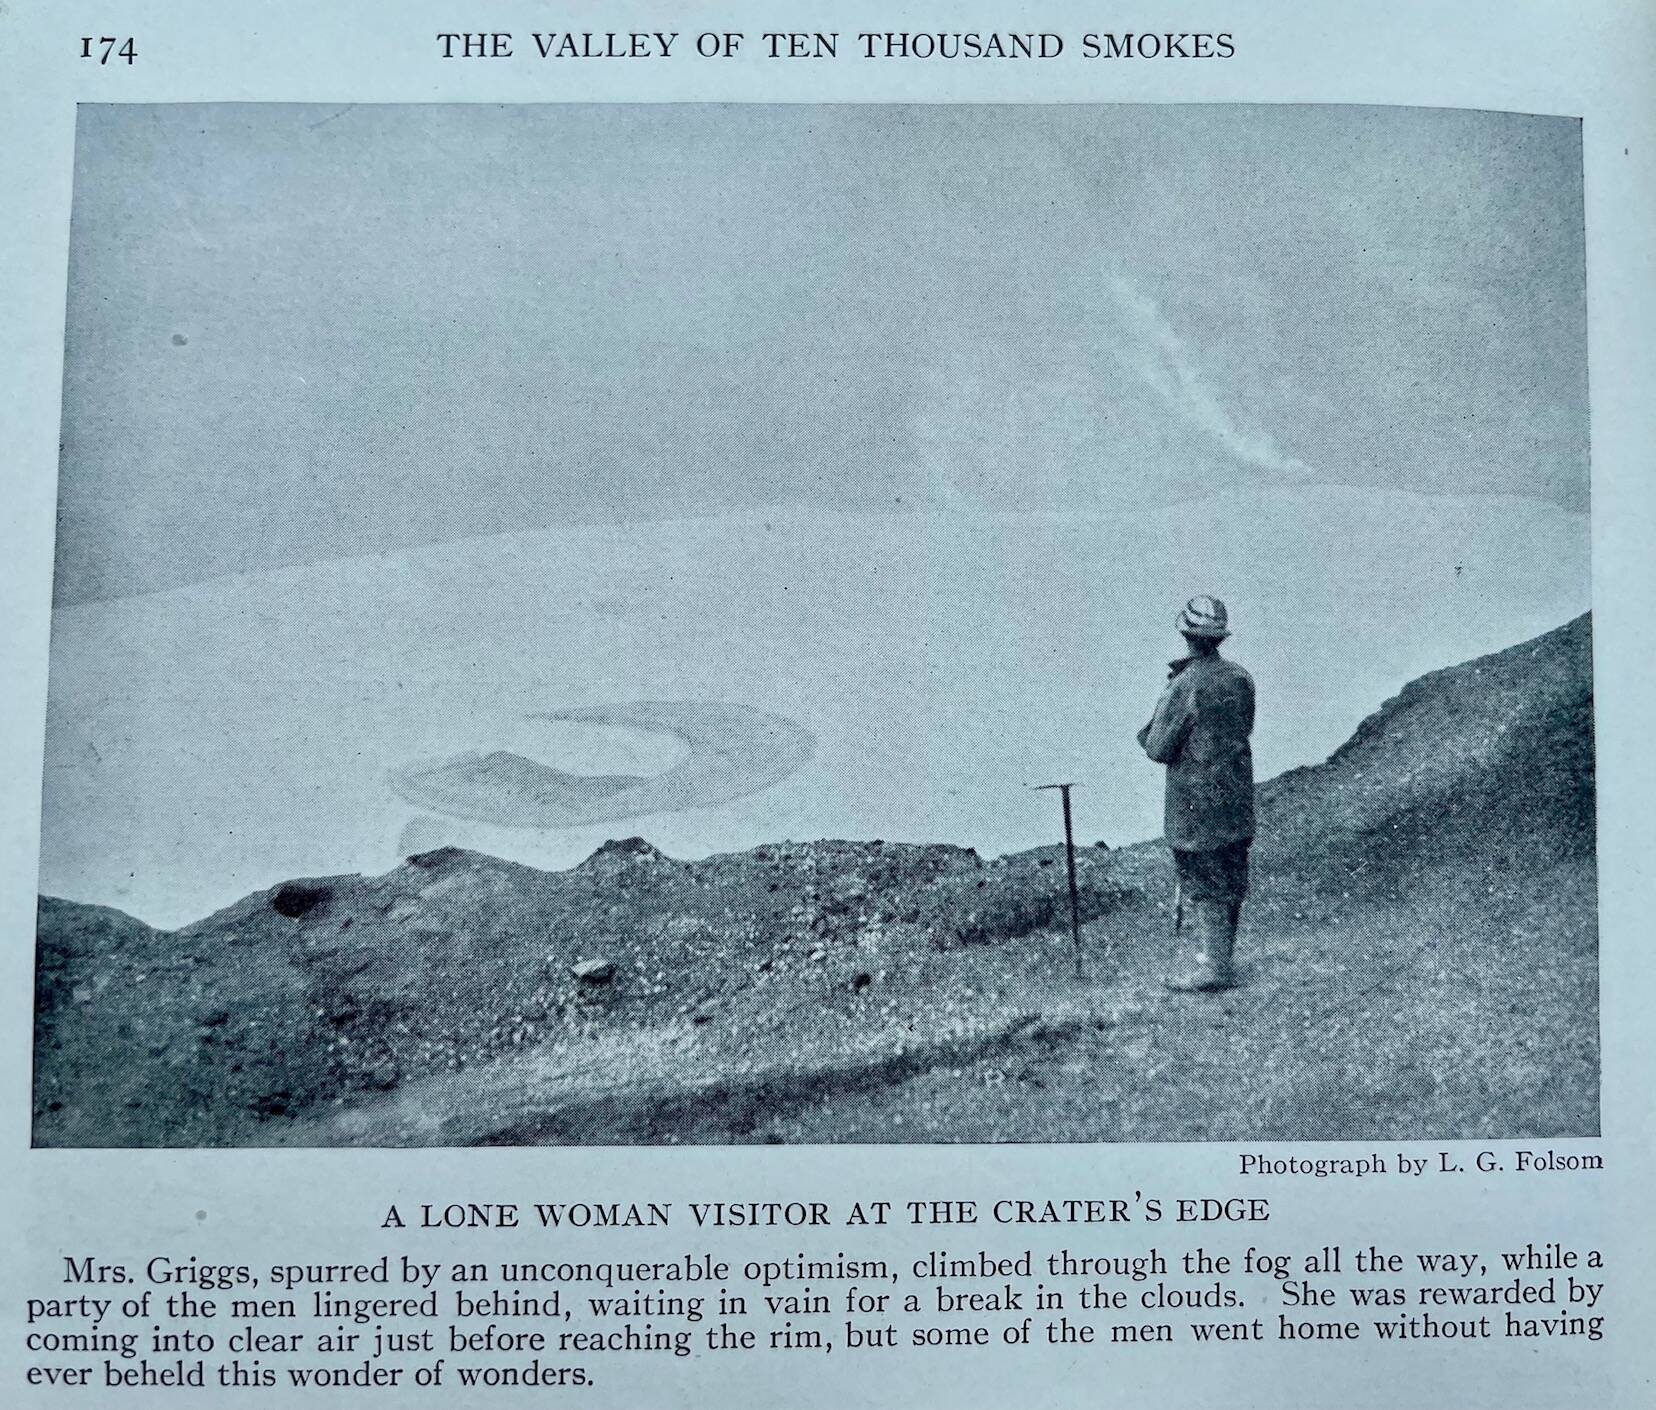 Laura Griggs, wife of botanist Robert Griggs, stands at the rim of Katmai Caldera, a crater located where the top of Mount Katmai stood before the 1912 eruption. (L.G. Folsom, from the book “The Valley of 10,000 Smokes” by Robert Griggs)